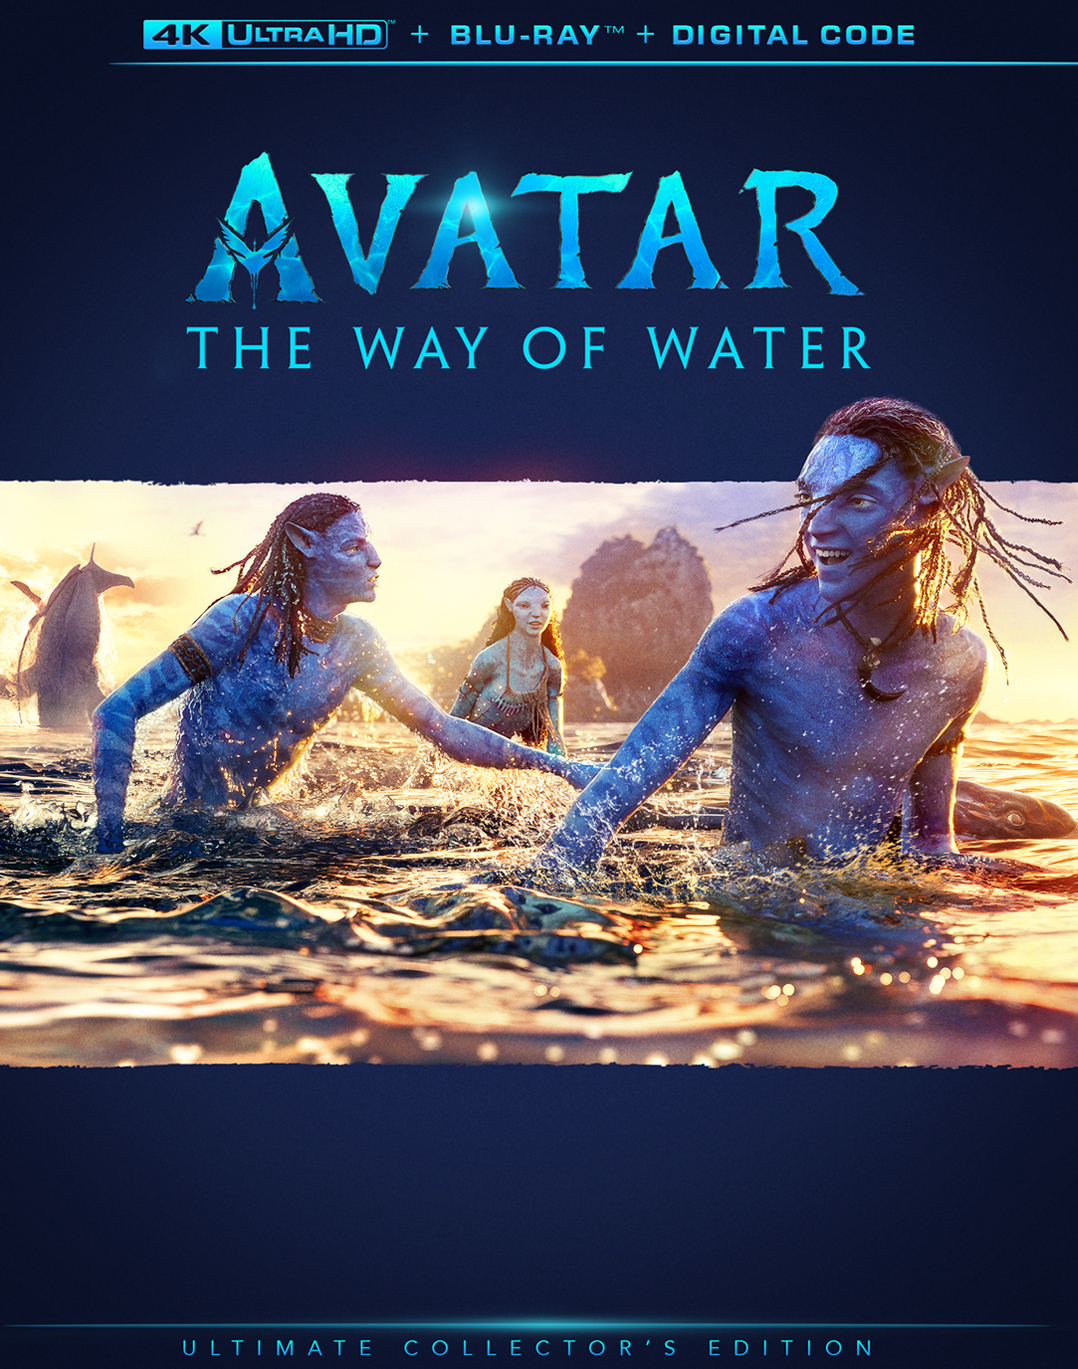 Avatar: The Way of Water [Includes Digital Copy] [Blu-ray] [2022] - Best Buy